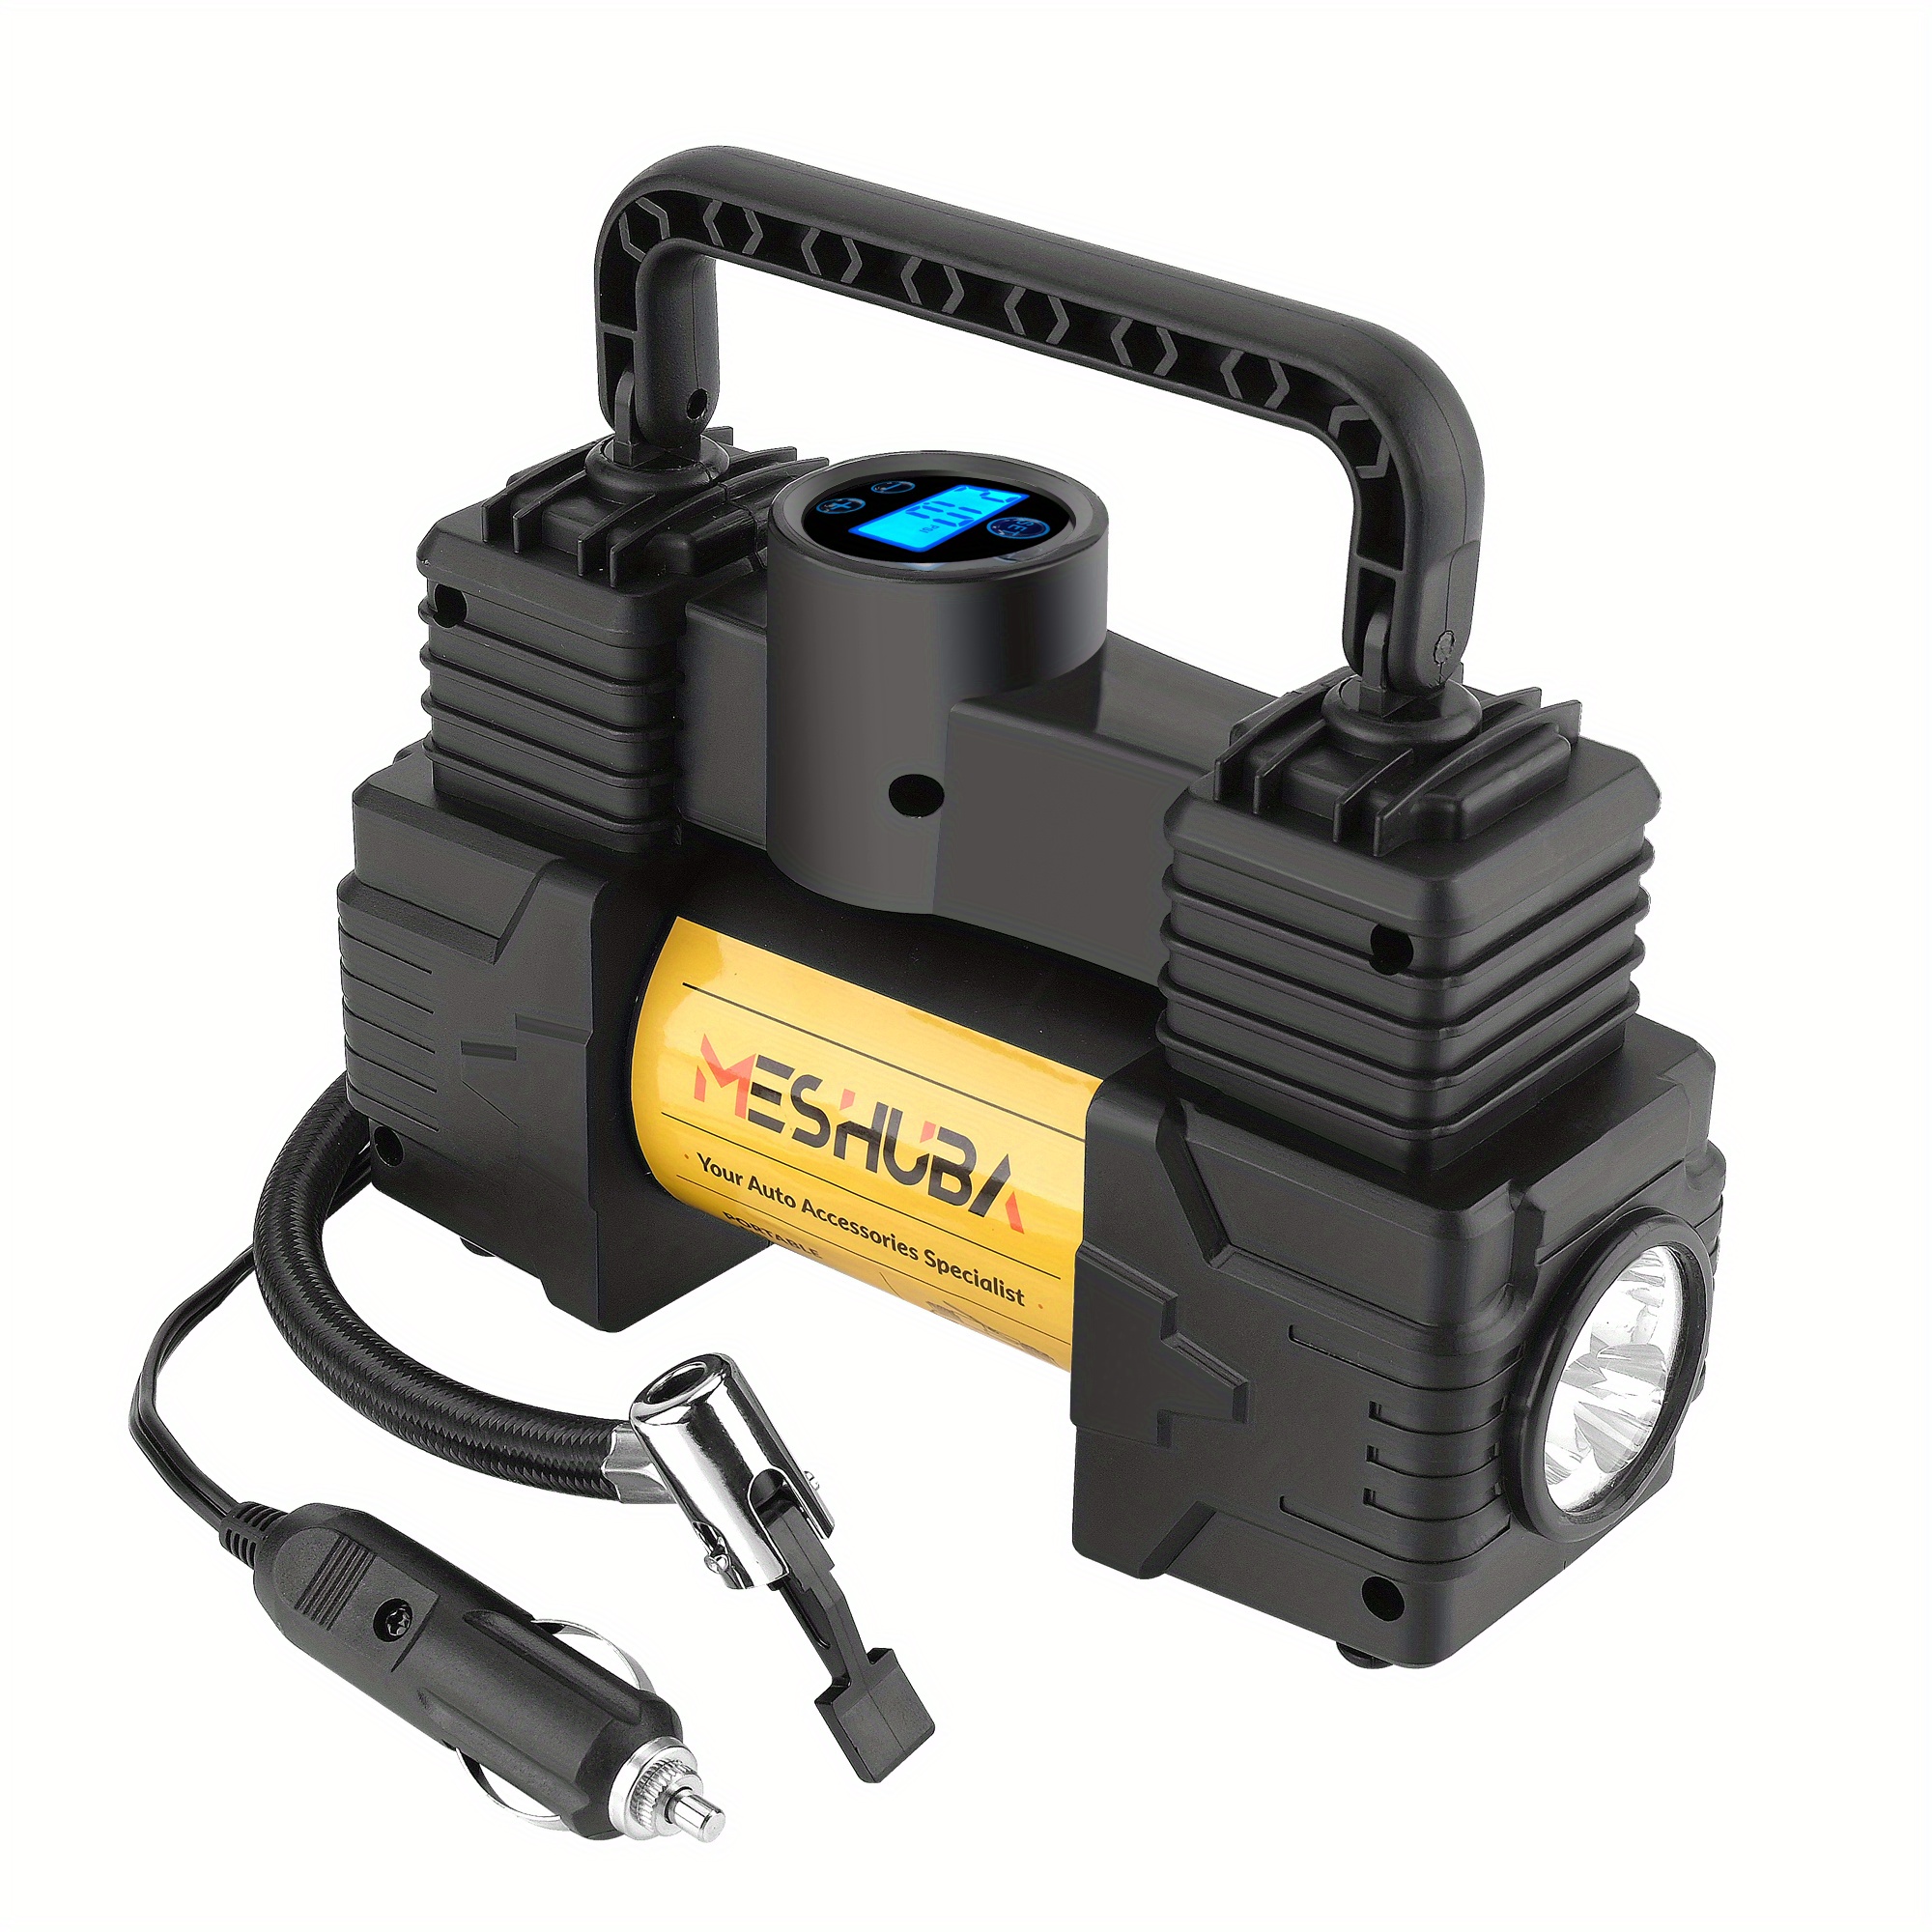 12V 150PSI Rechargeable Air Pump Tire Inflator Cordless Portable Compressor  Digital Car Tyre Pump For Car Bicycle Tires Balls From Fastderect, $68.34